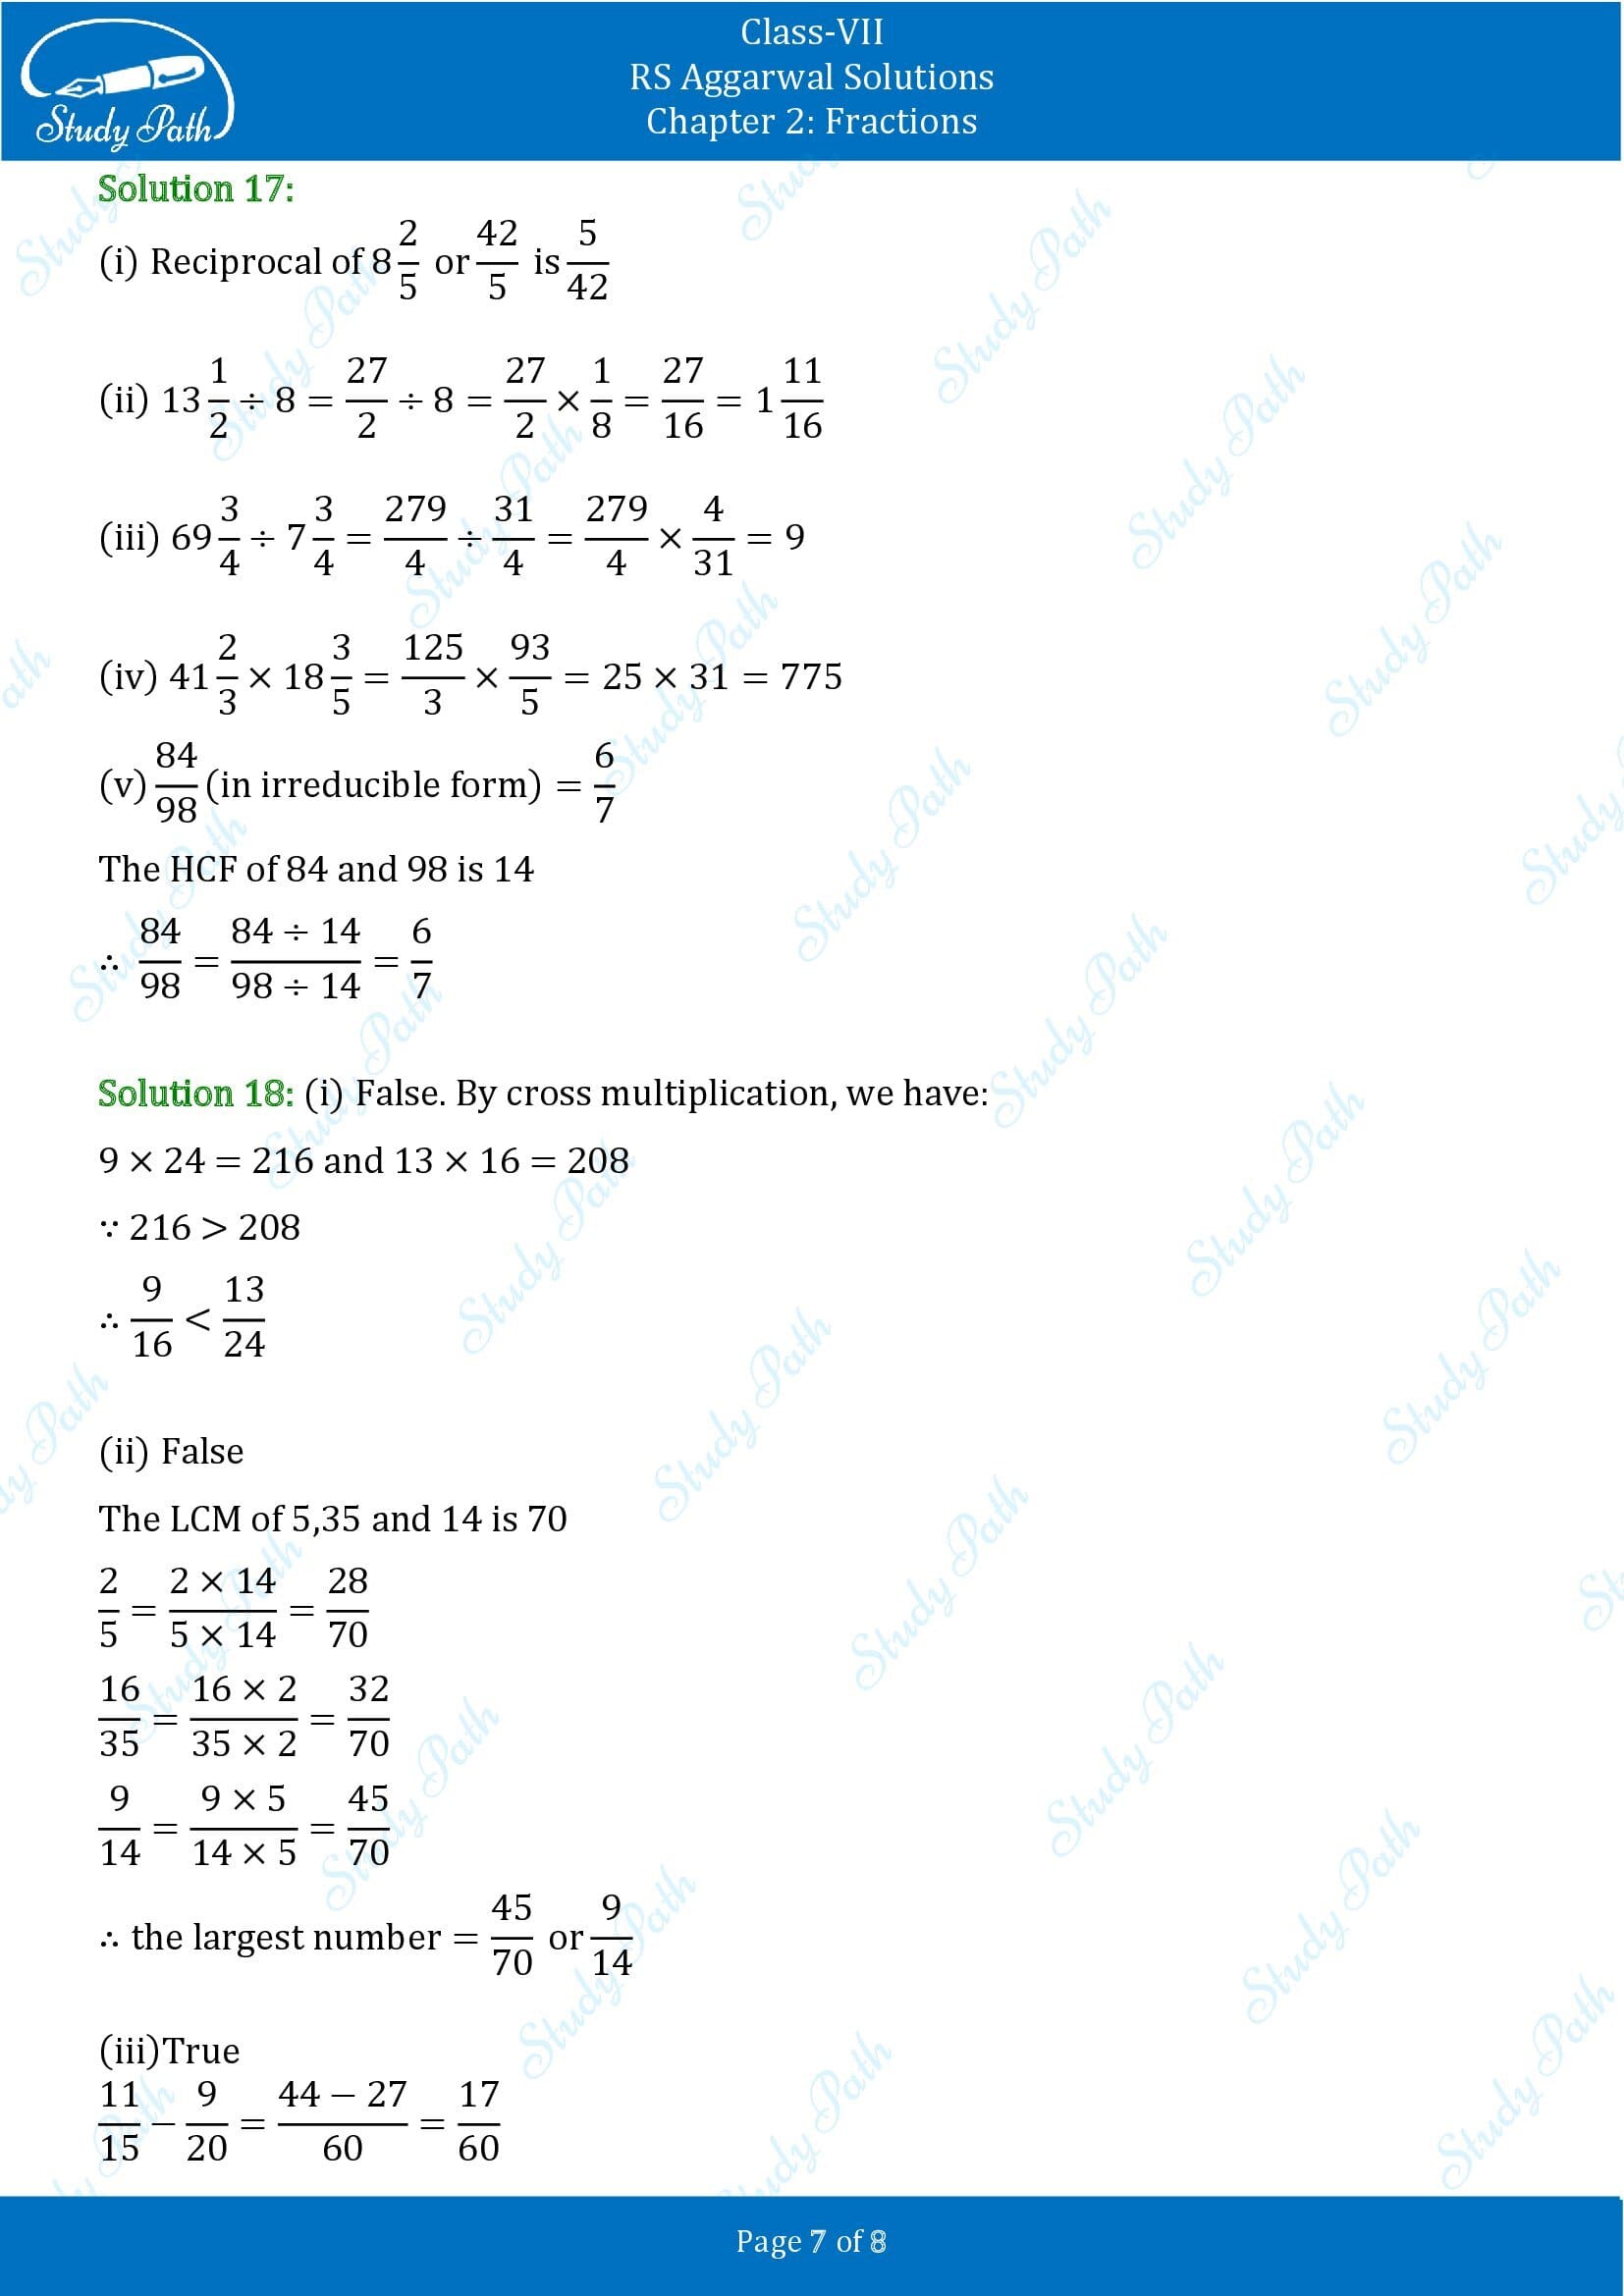 RS Aggarwal Solutions Class 7 Chapter 2 Fractions Test Paper 00007